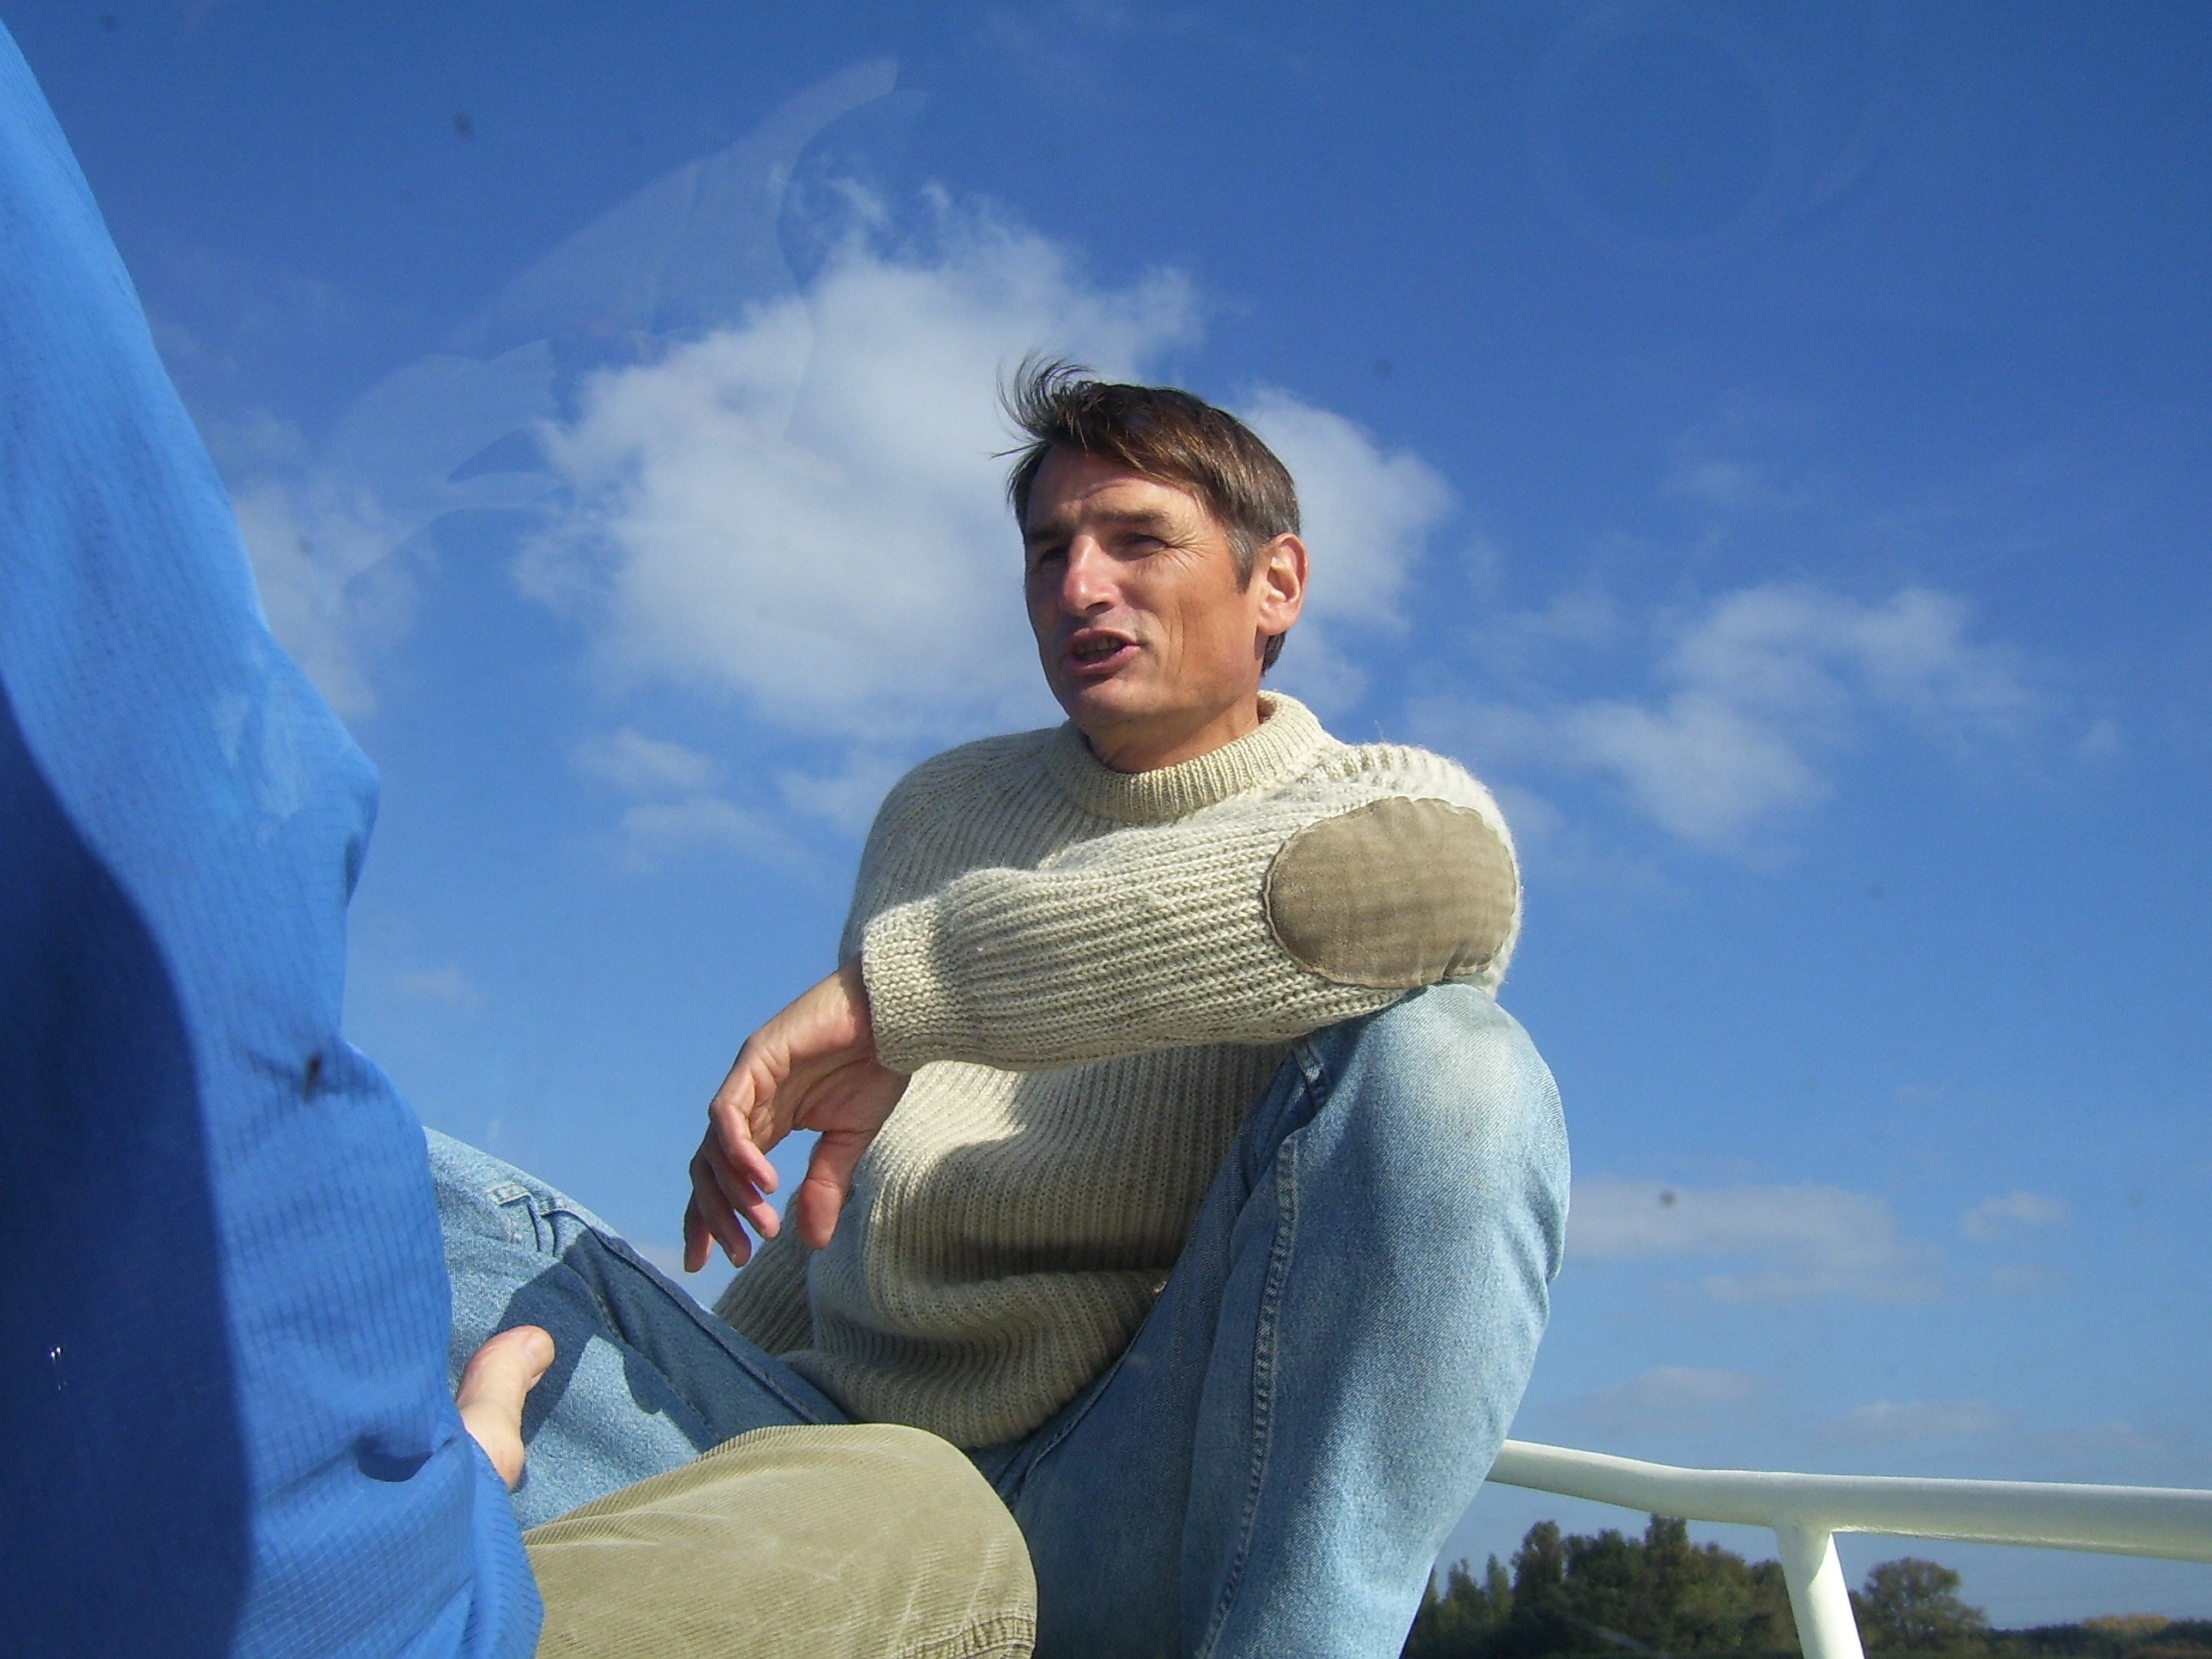 men's gray cashmere sweater and blue jeans